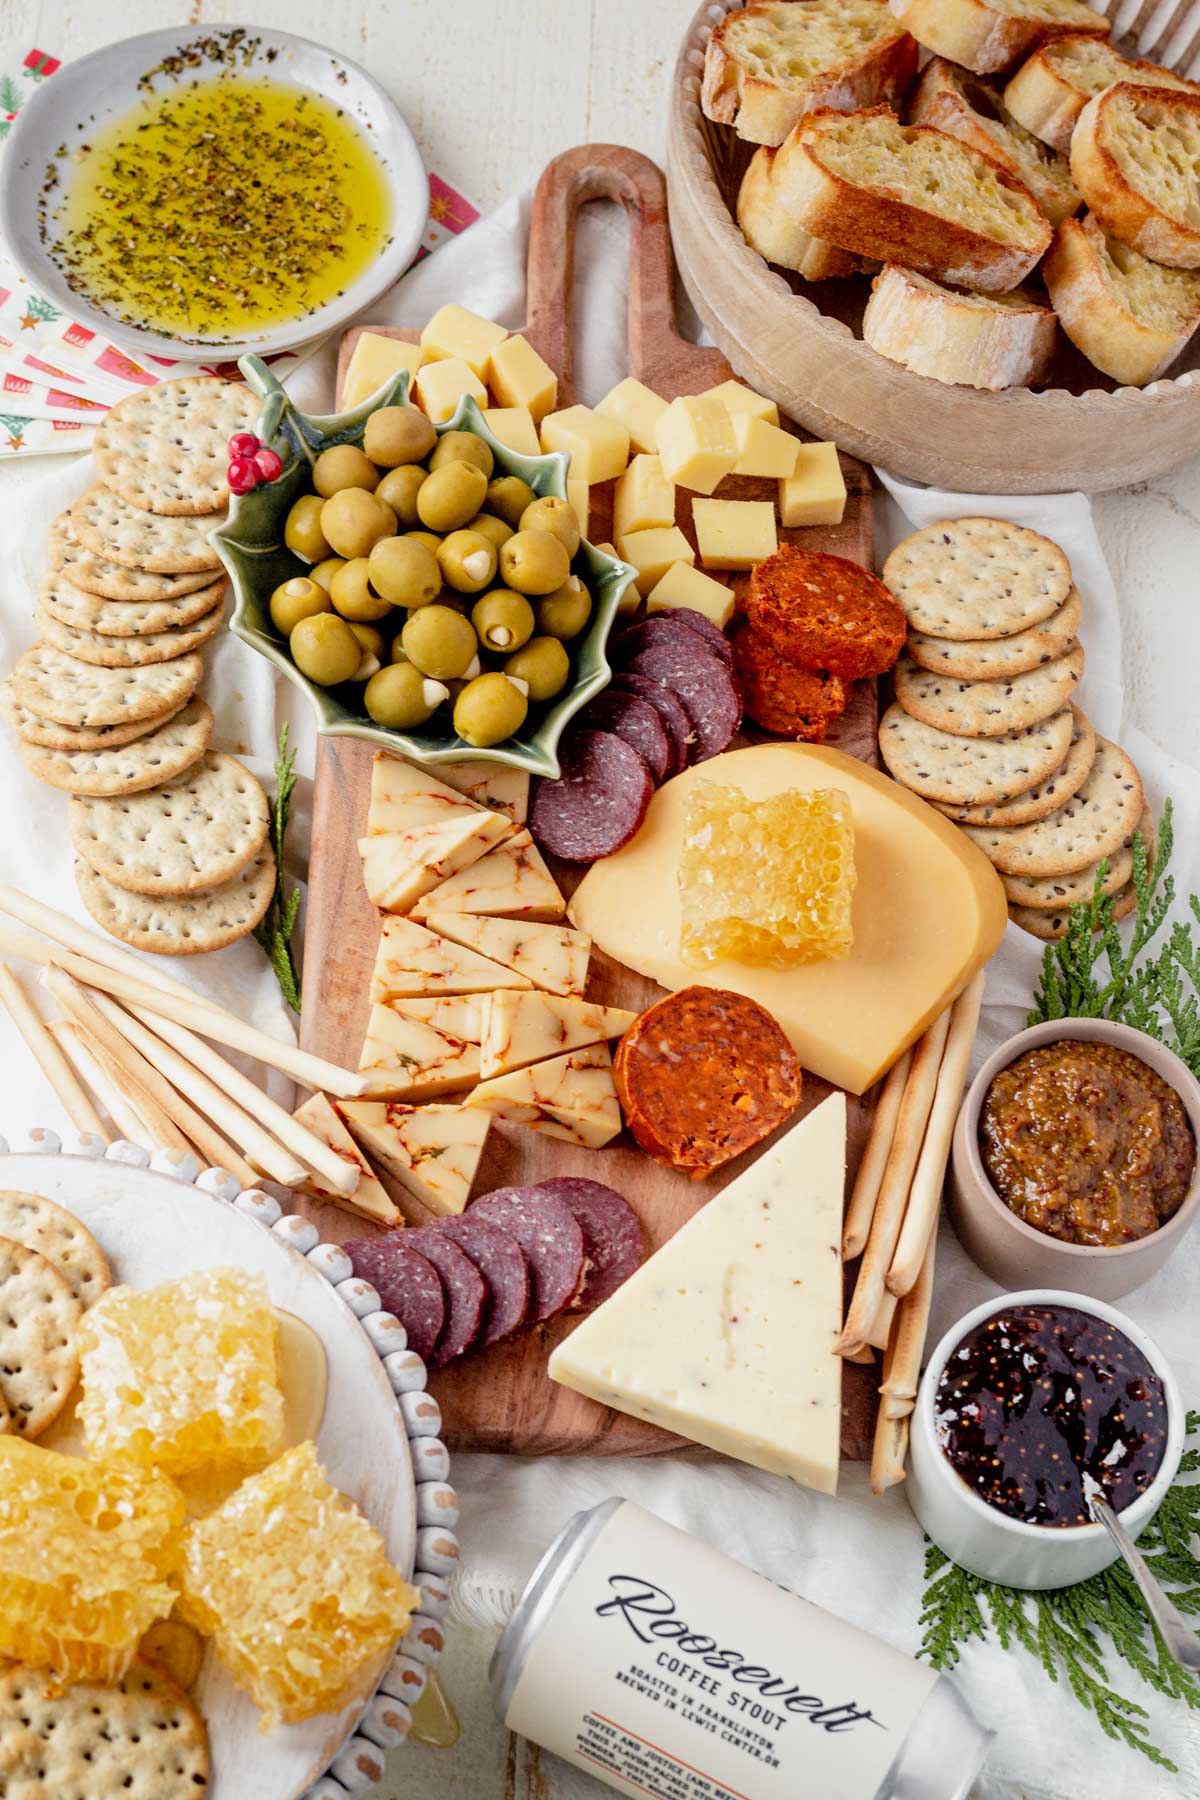 a full charcuterie spread on a wooden cutting board with products from downtown delaware ohio